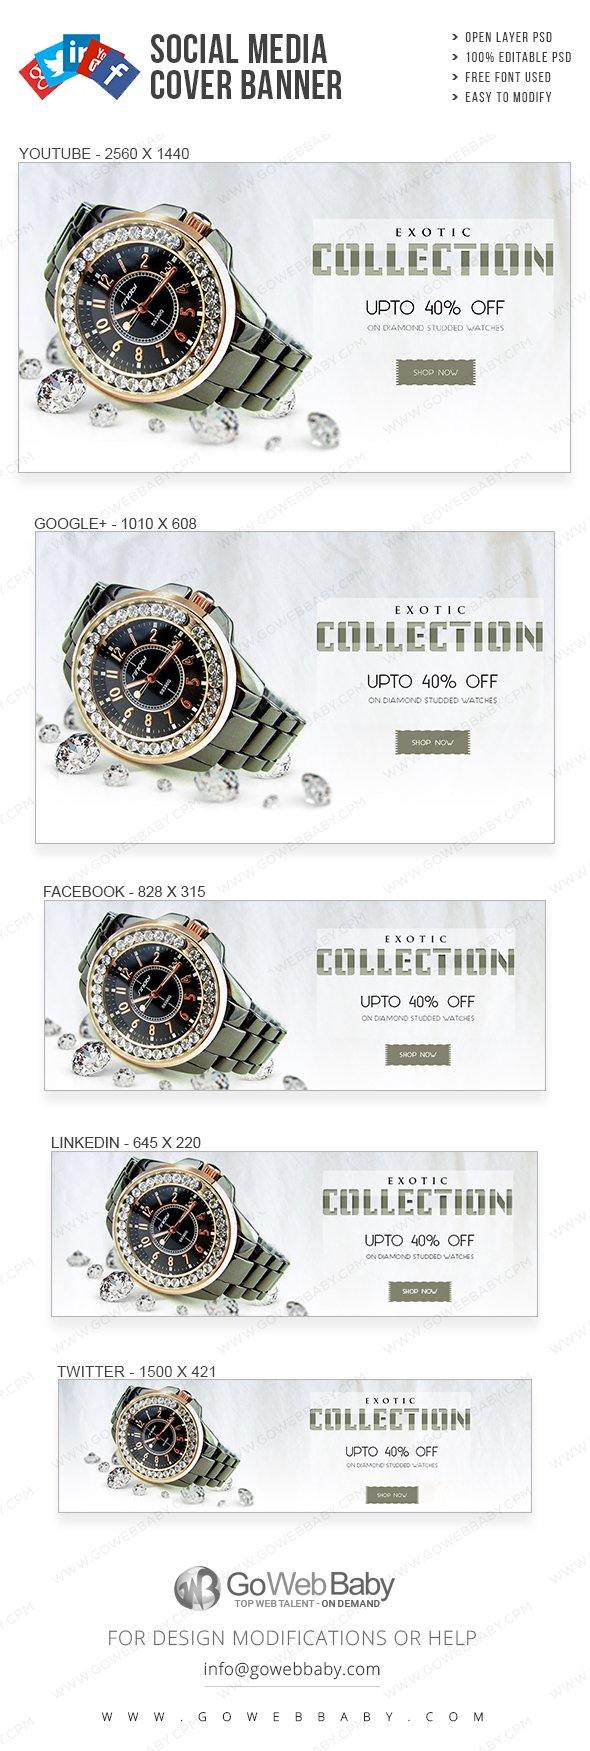 Social Media Cover Banner - Exotic Watch Collection For Website Marketing - GoWebBaby.Com